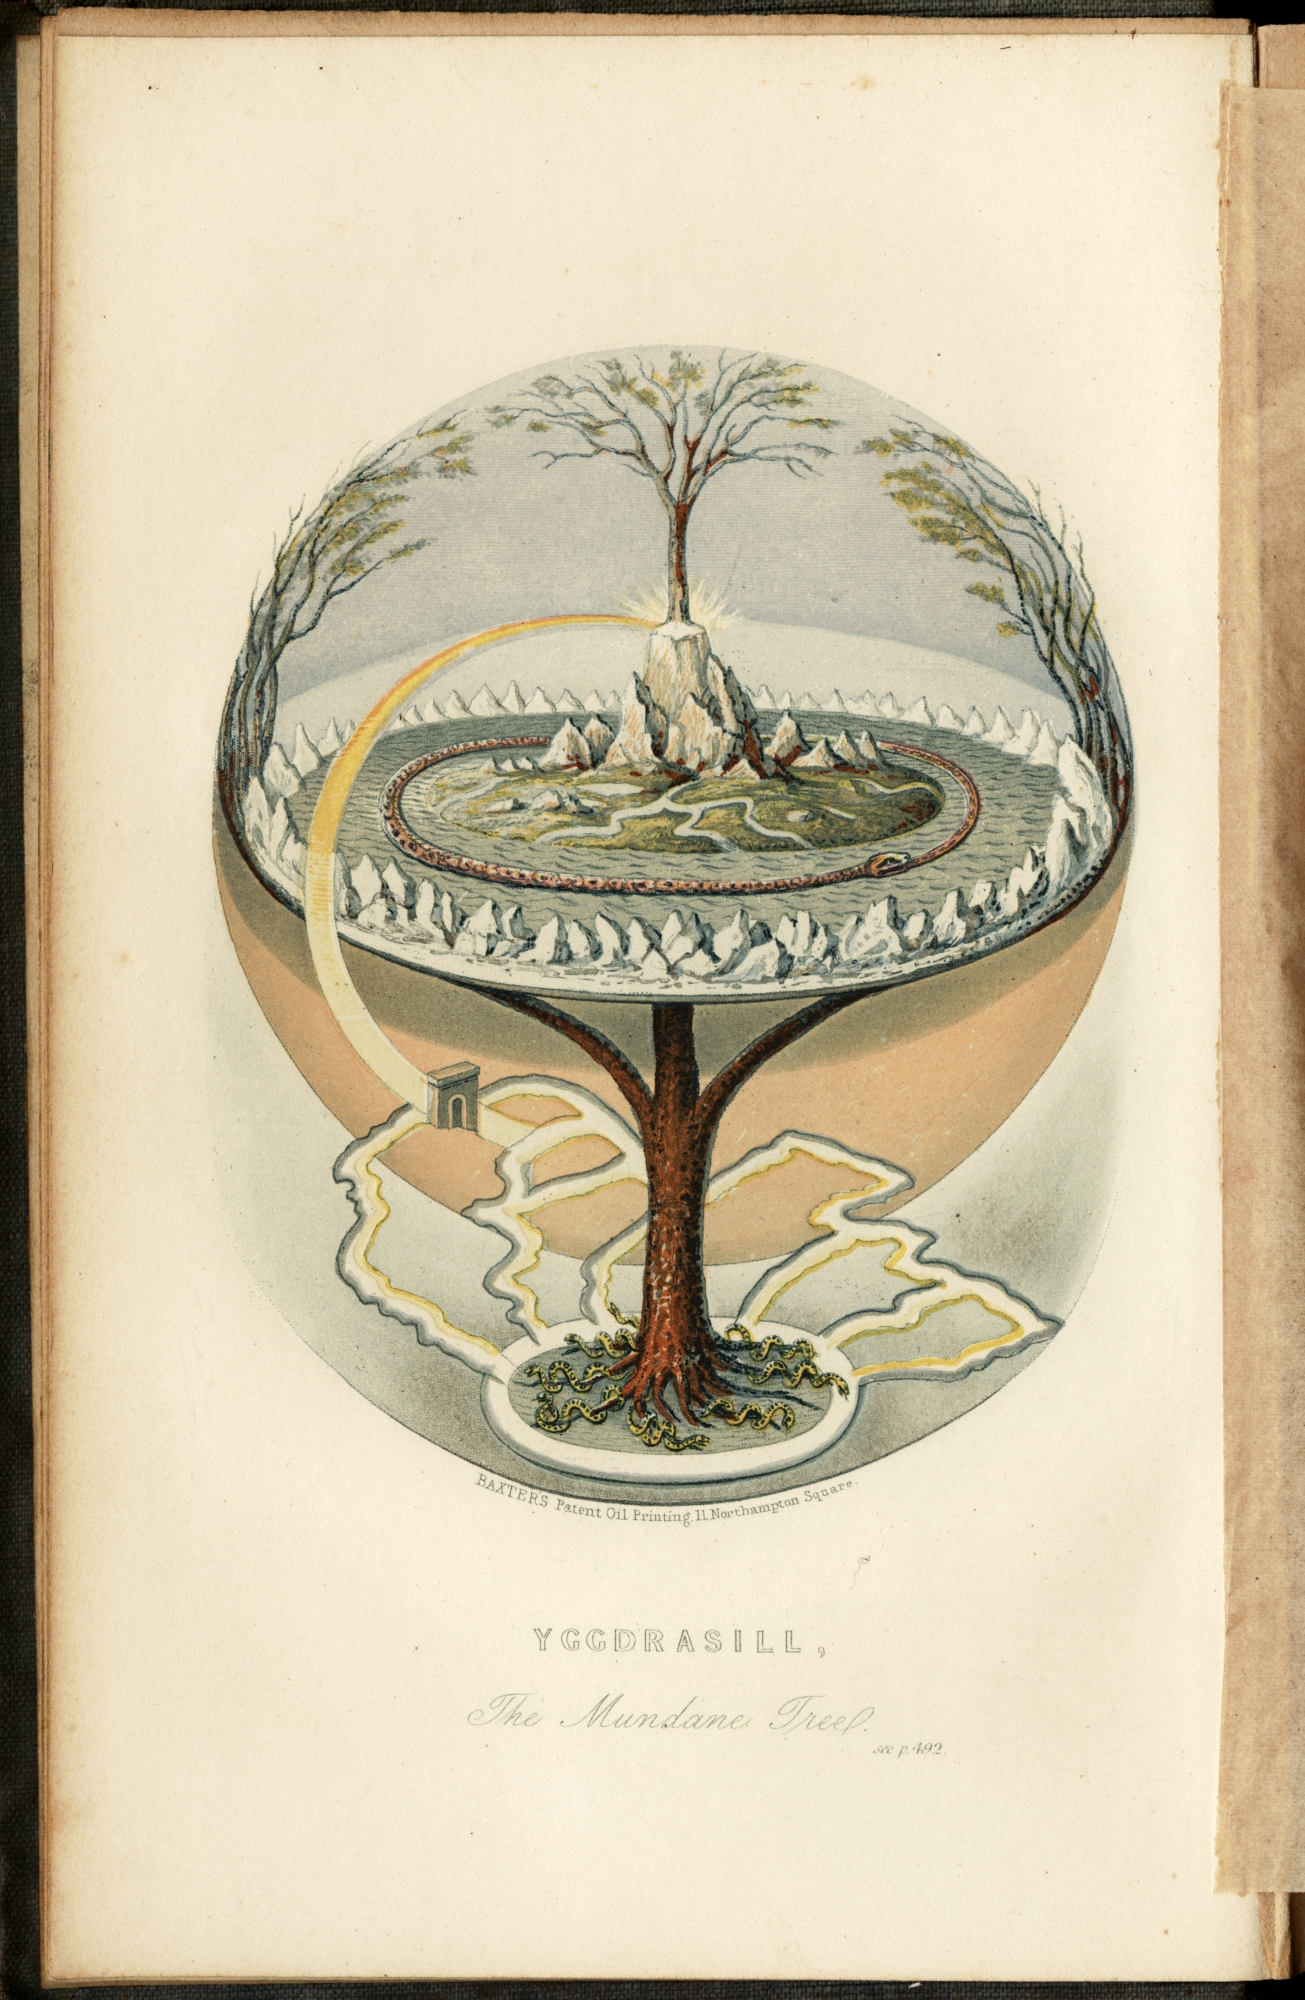 An illustration of a tree within a sphere containing natural environments